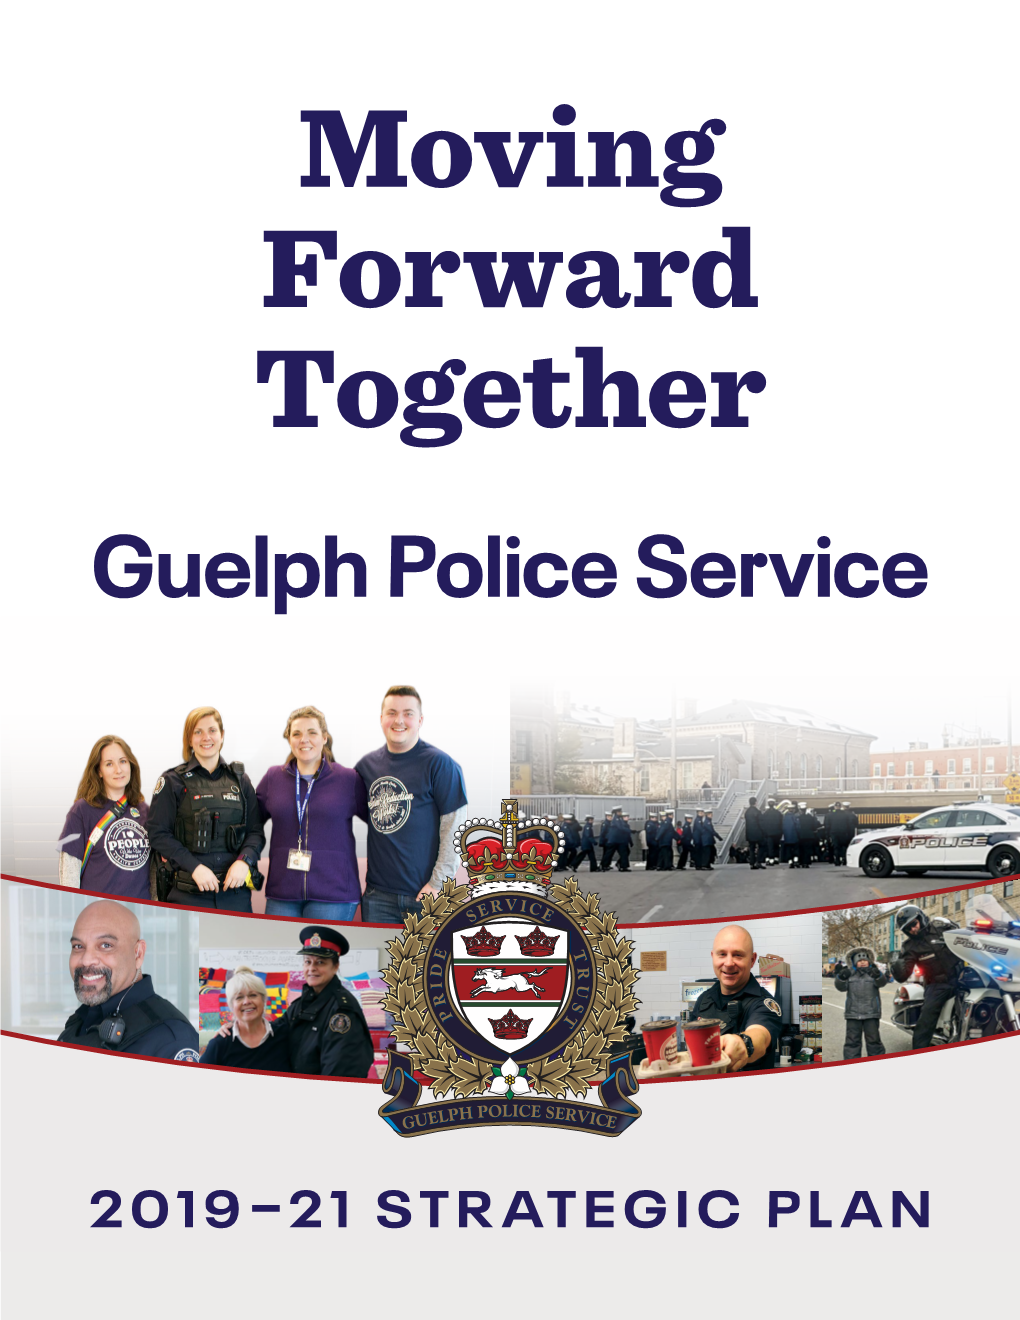 Moving Forward Together: Guelph Police Service 2019-2021 Strategic